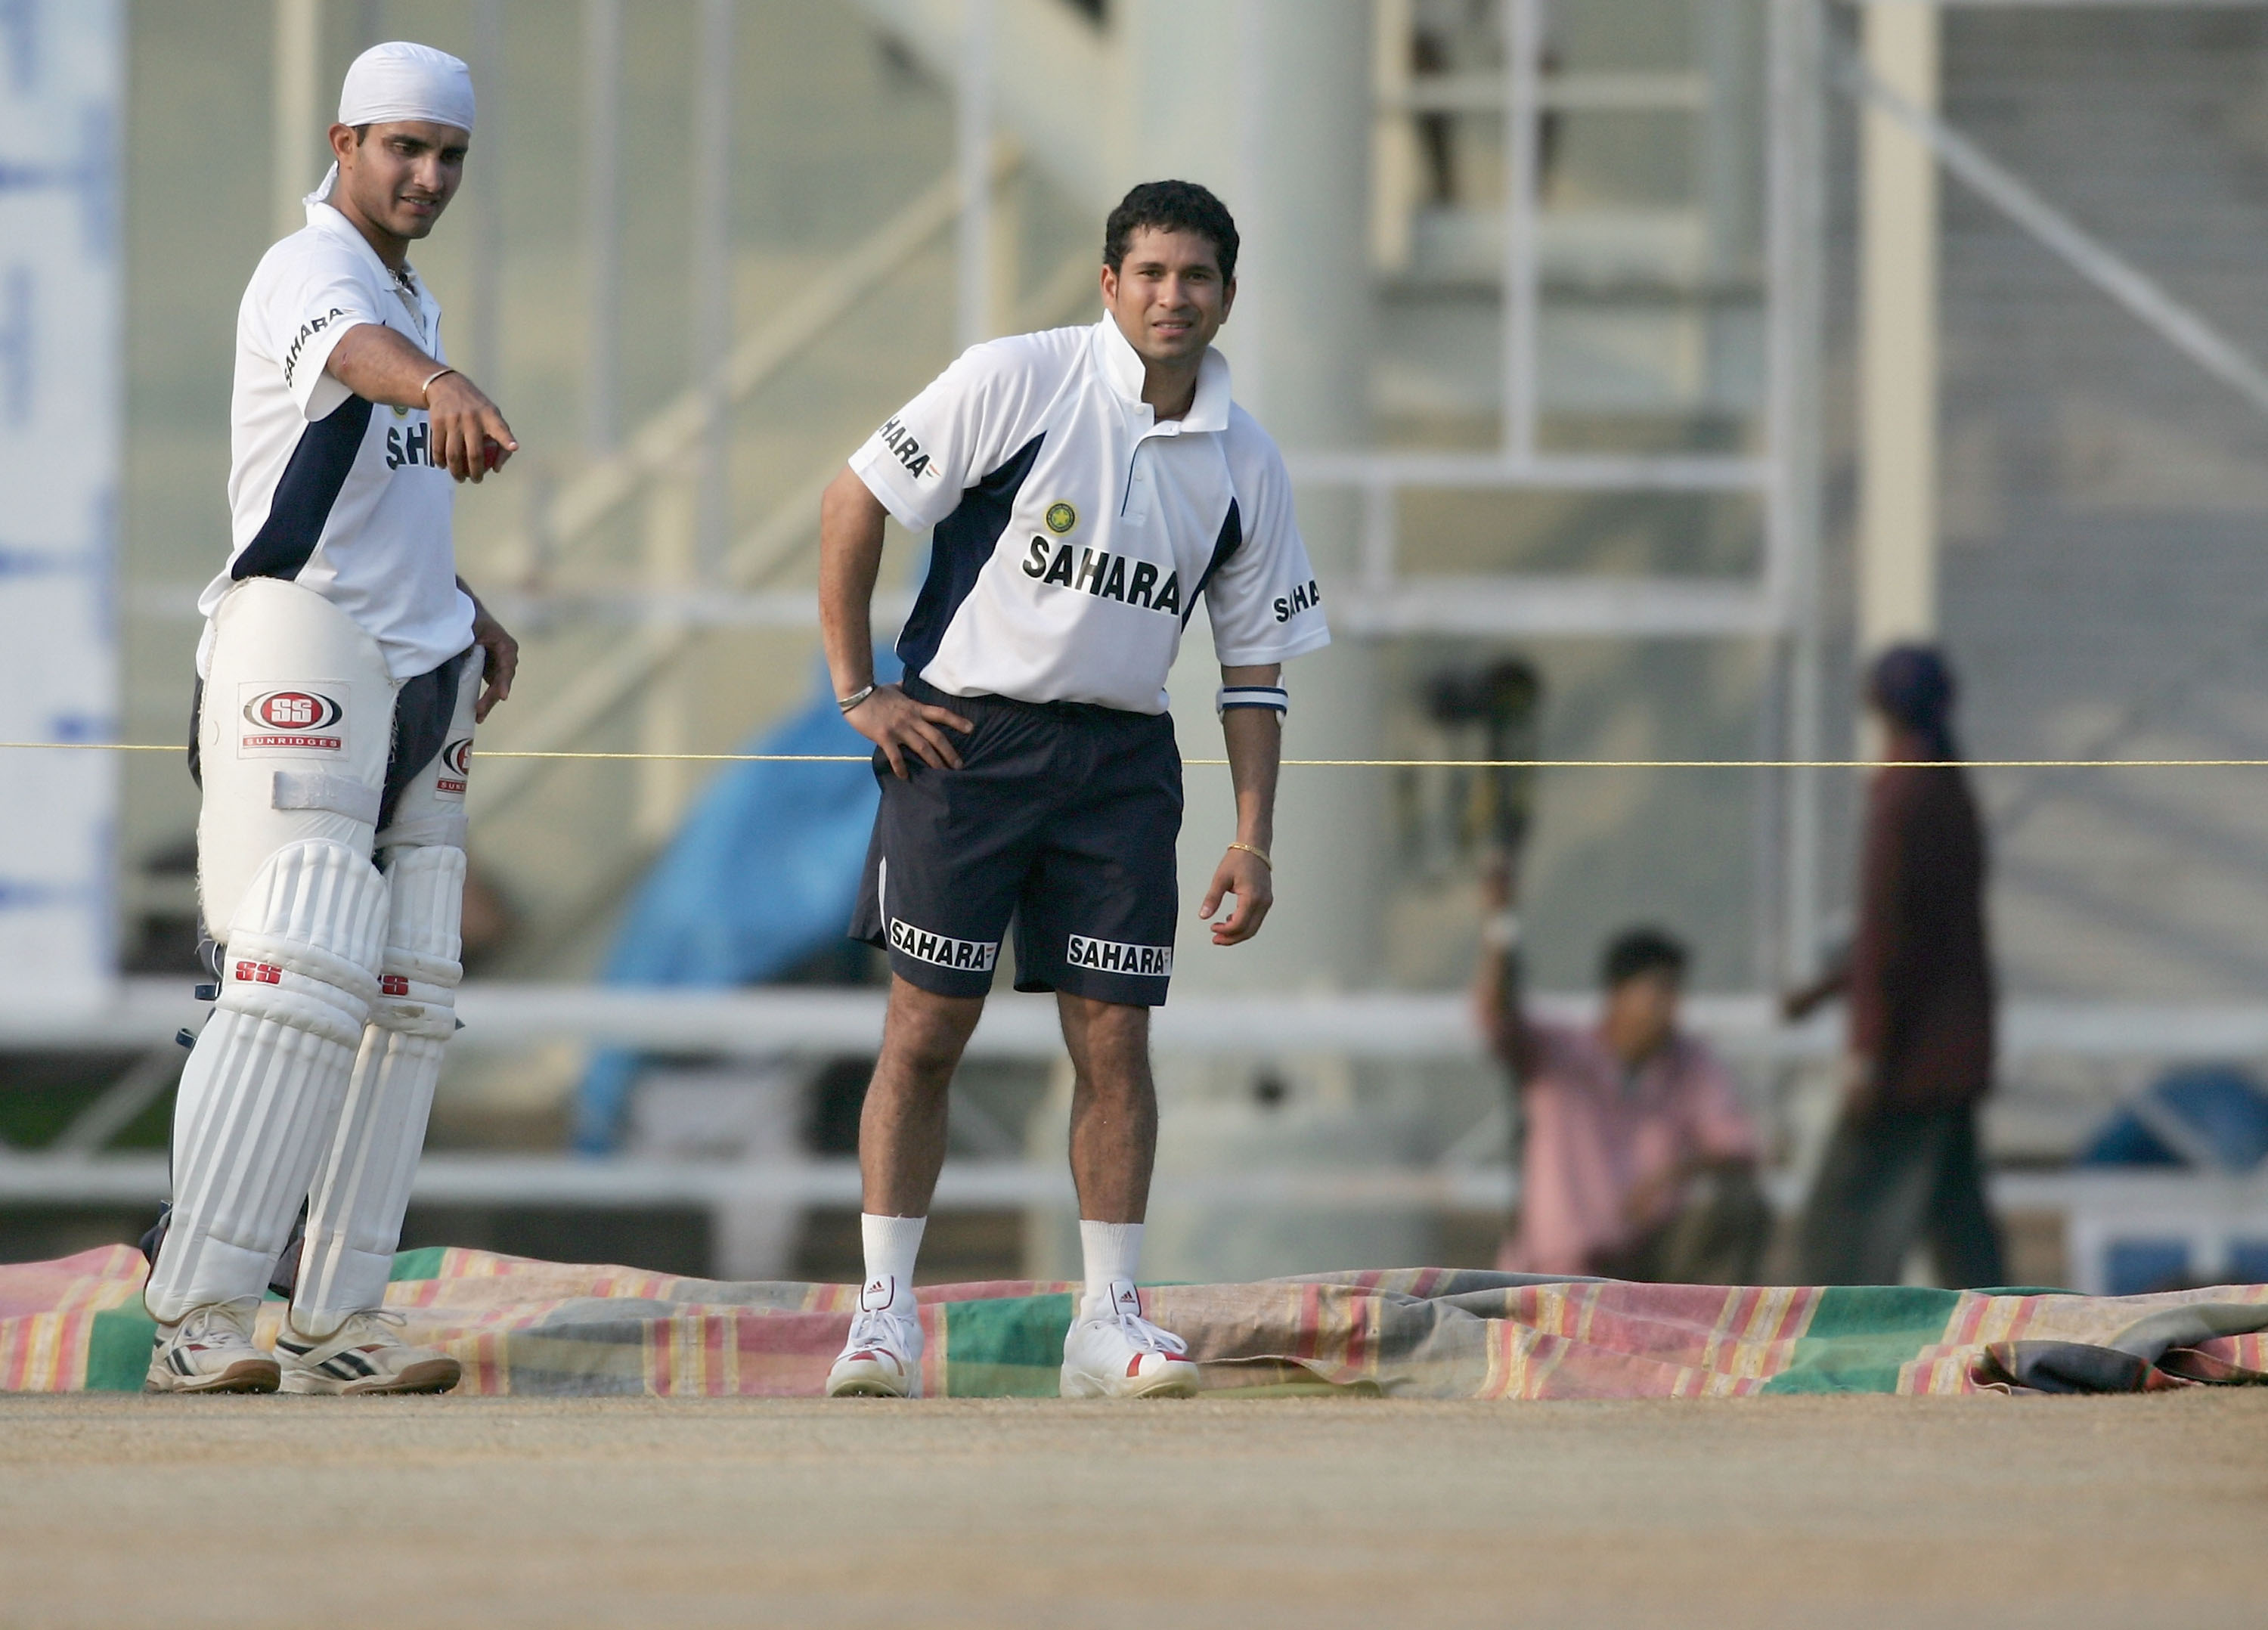 The differences between Sachin Tendulkar and Sourav Ganguly that no one talks about